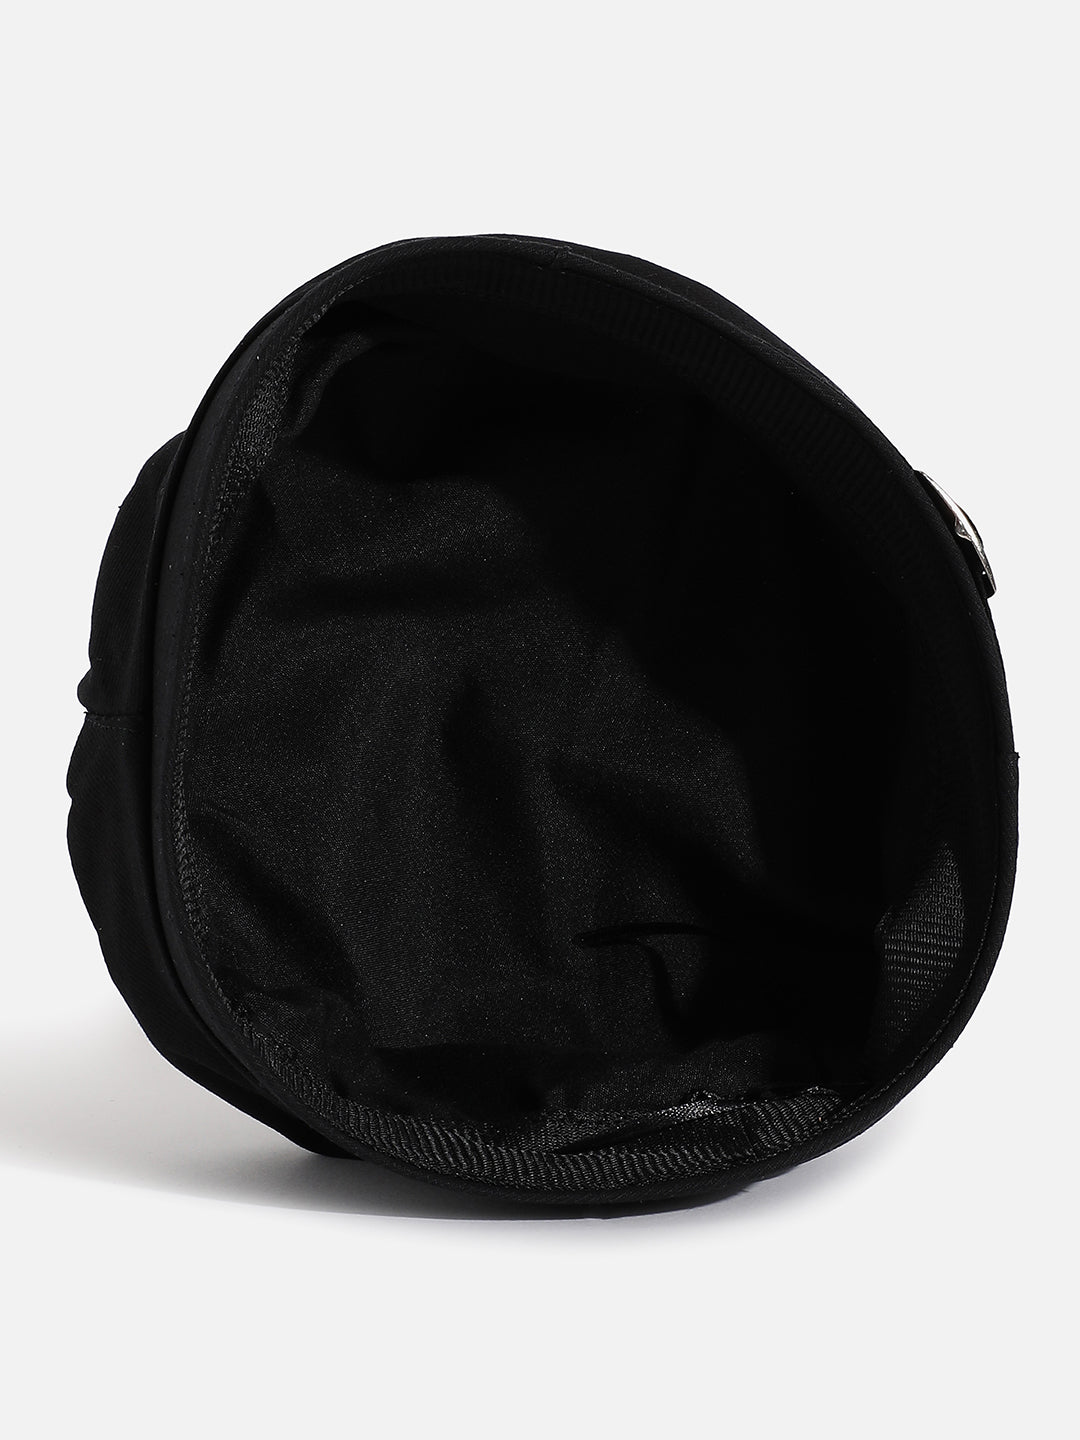 Black Solid Beret Hat With Buckle Detail